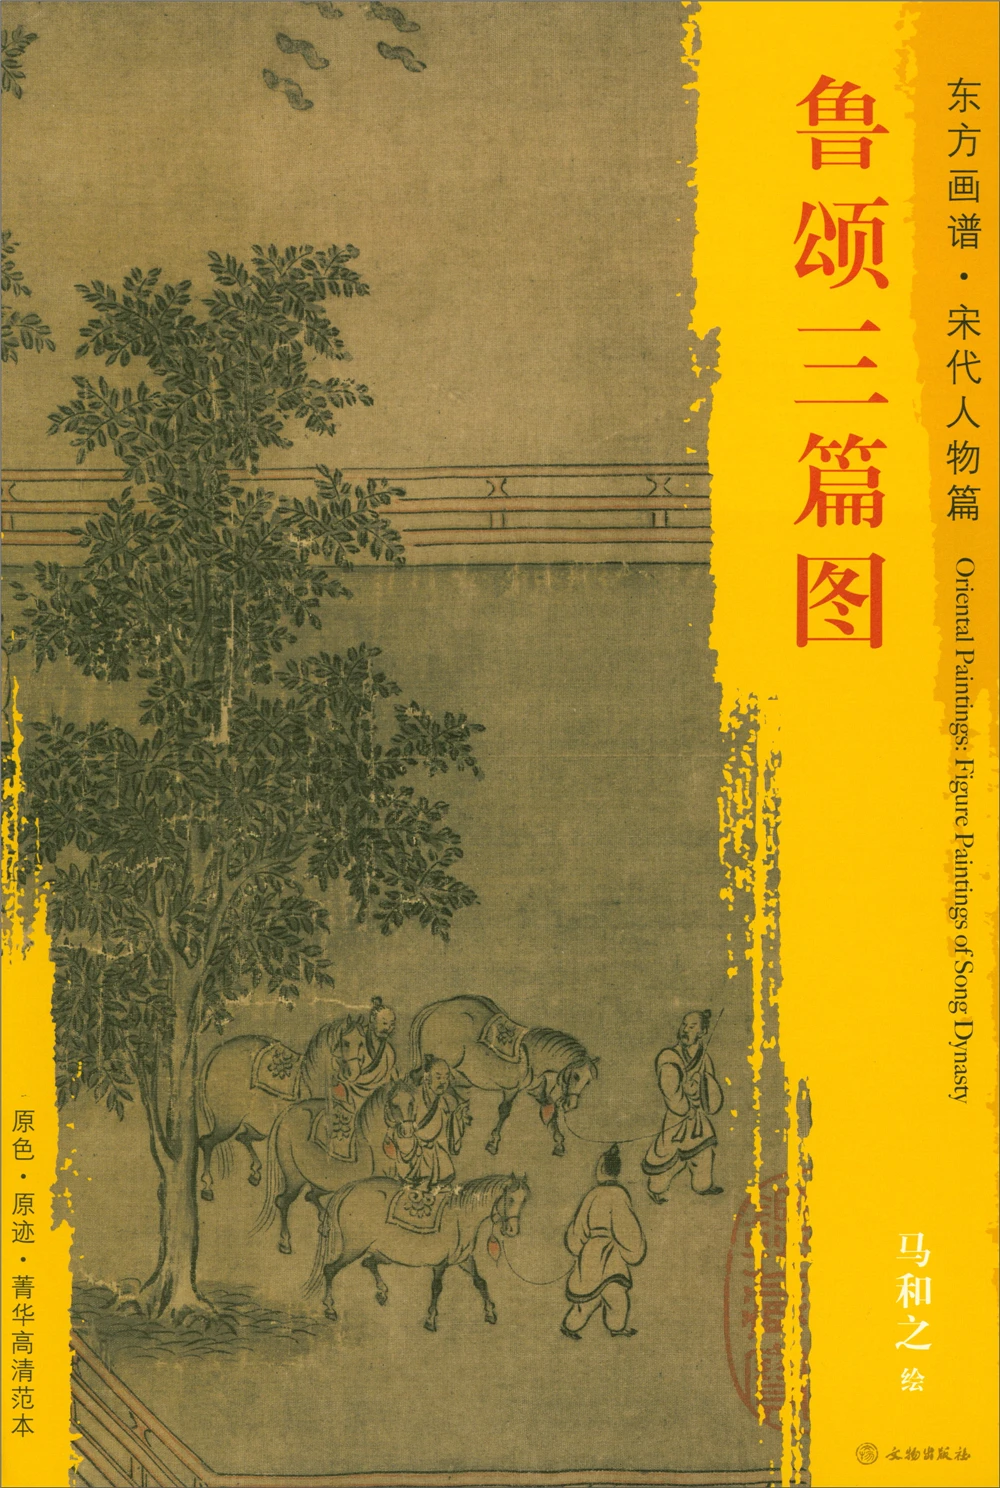 

Oriental paintings. Three high-definition copies of the Song Dynasty figure paintings Sketch Art Drawing Painting copyBook